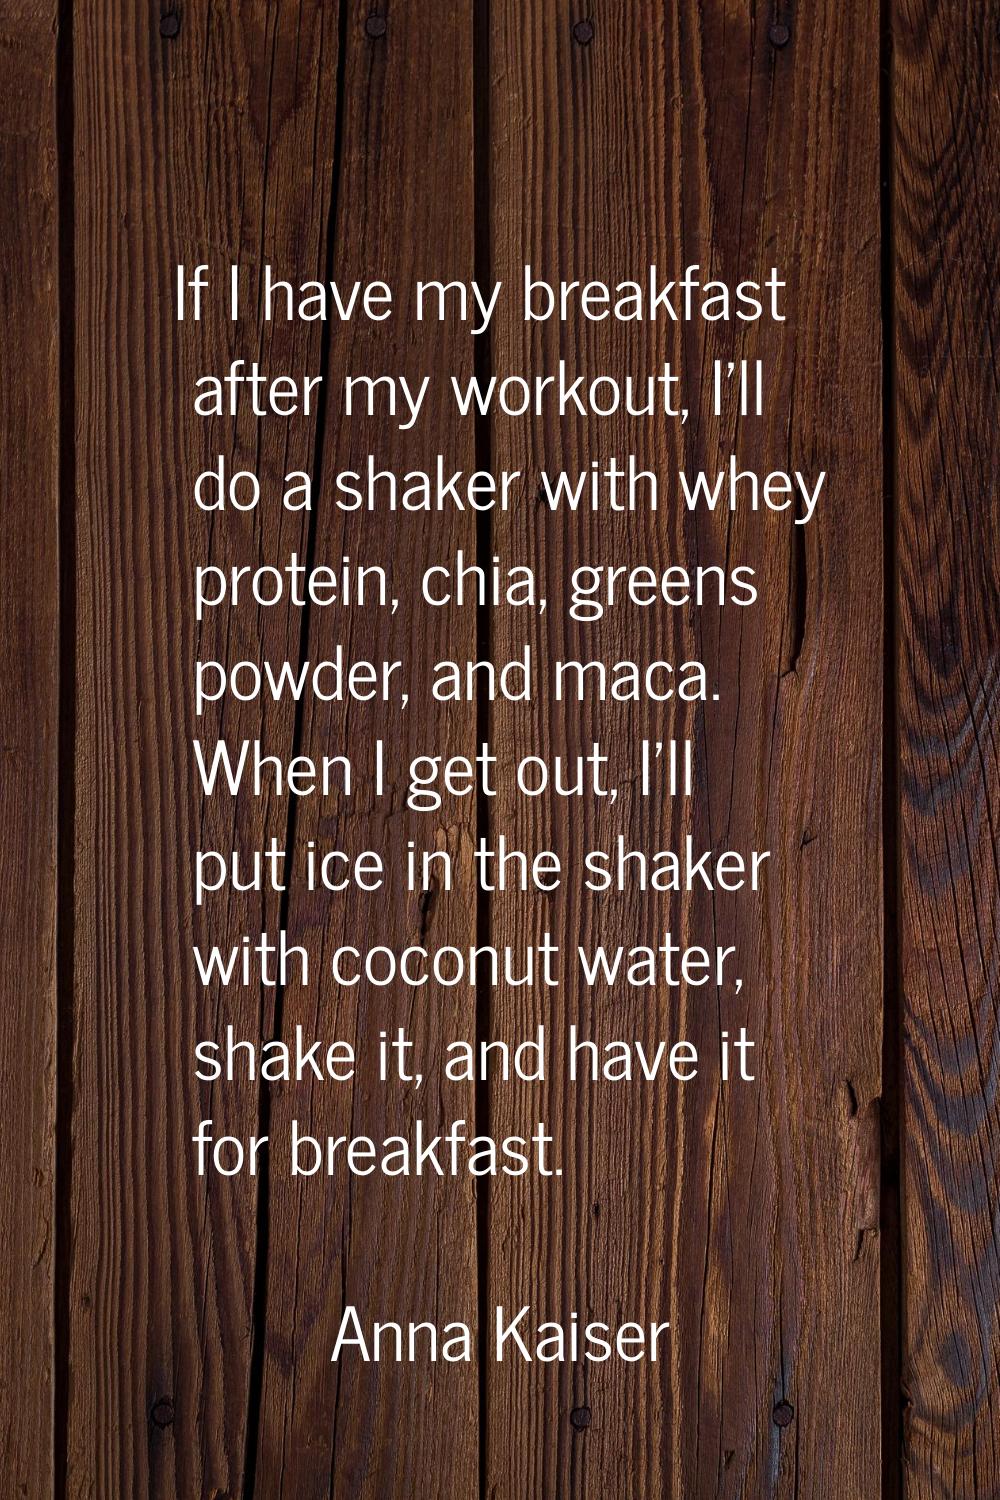 If I have my breakfast after my workout, I'll do a shaker with whey protein, chia, greens powder, a